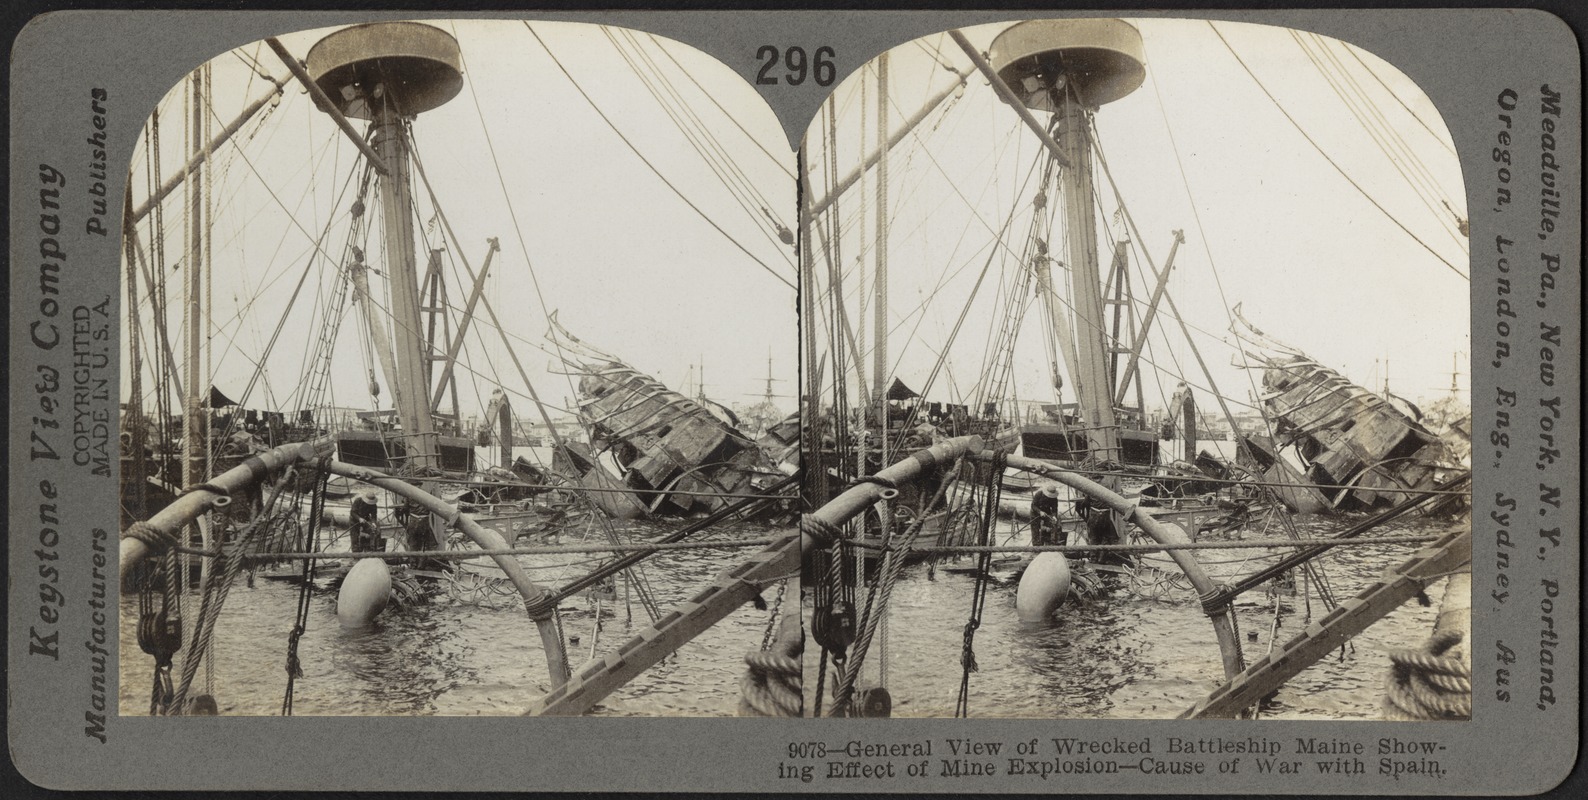 General view of wrecked battleship Maine